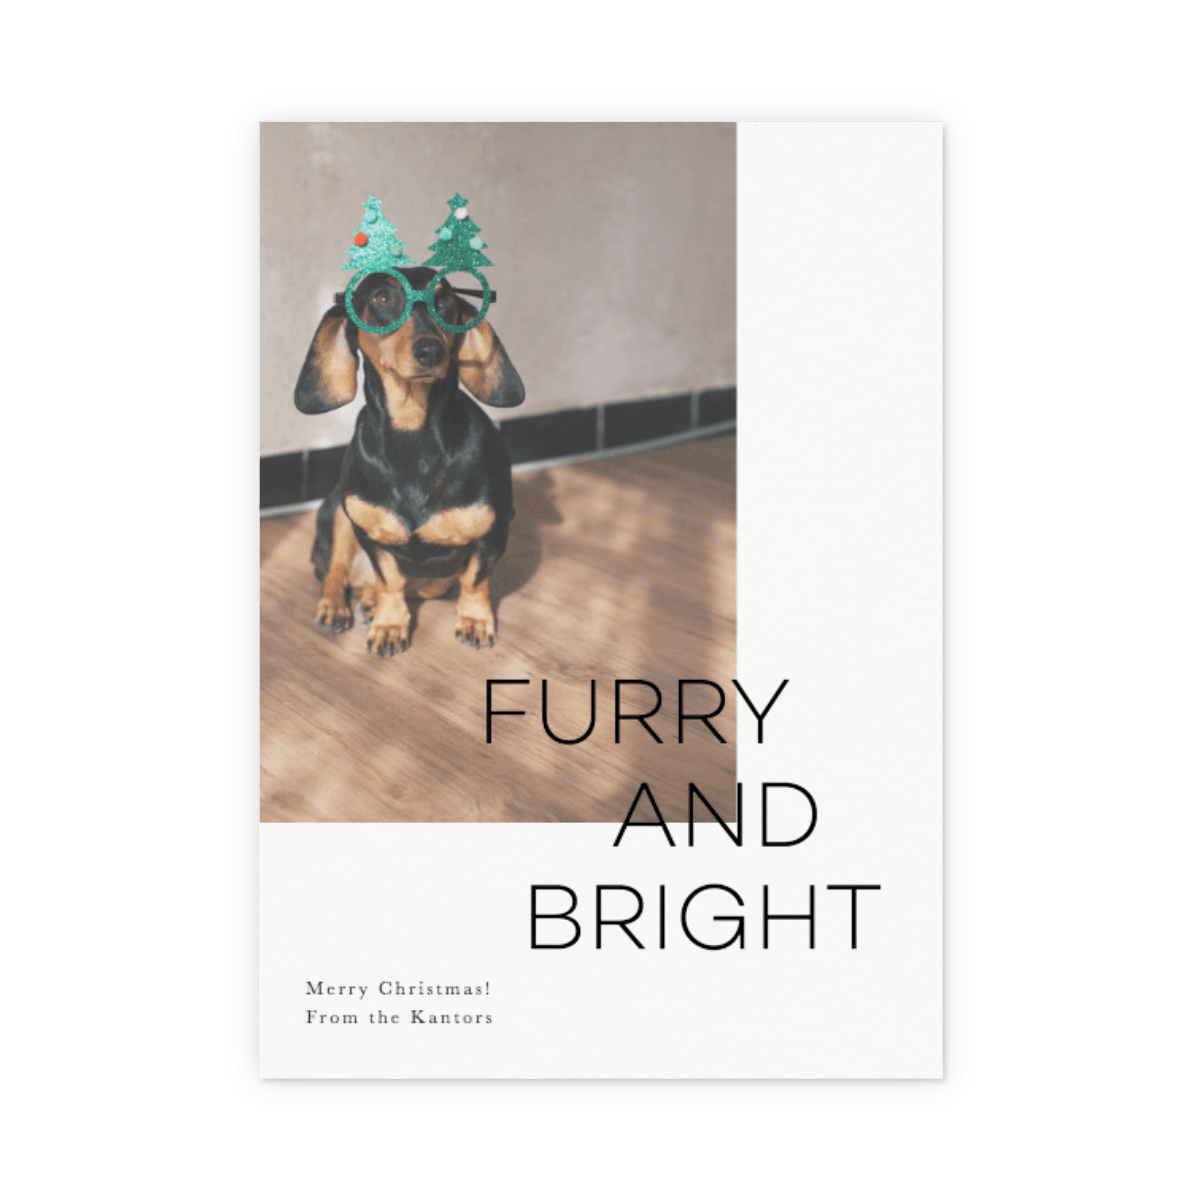 Furry and Bright